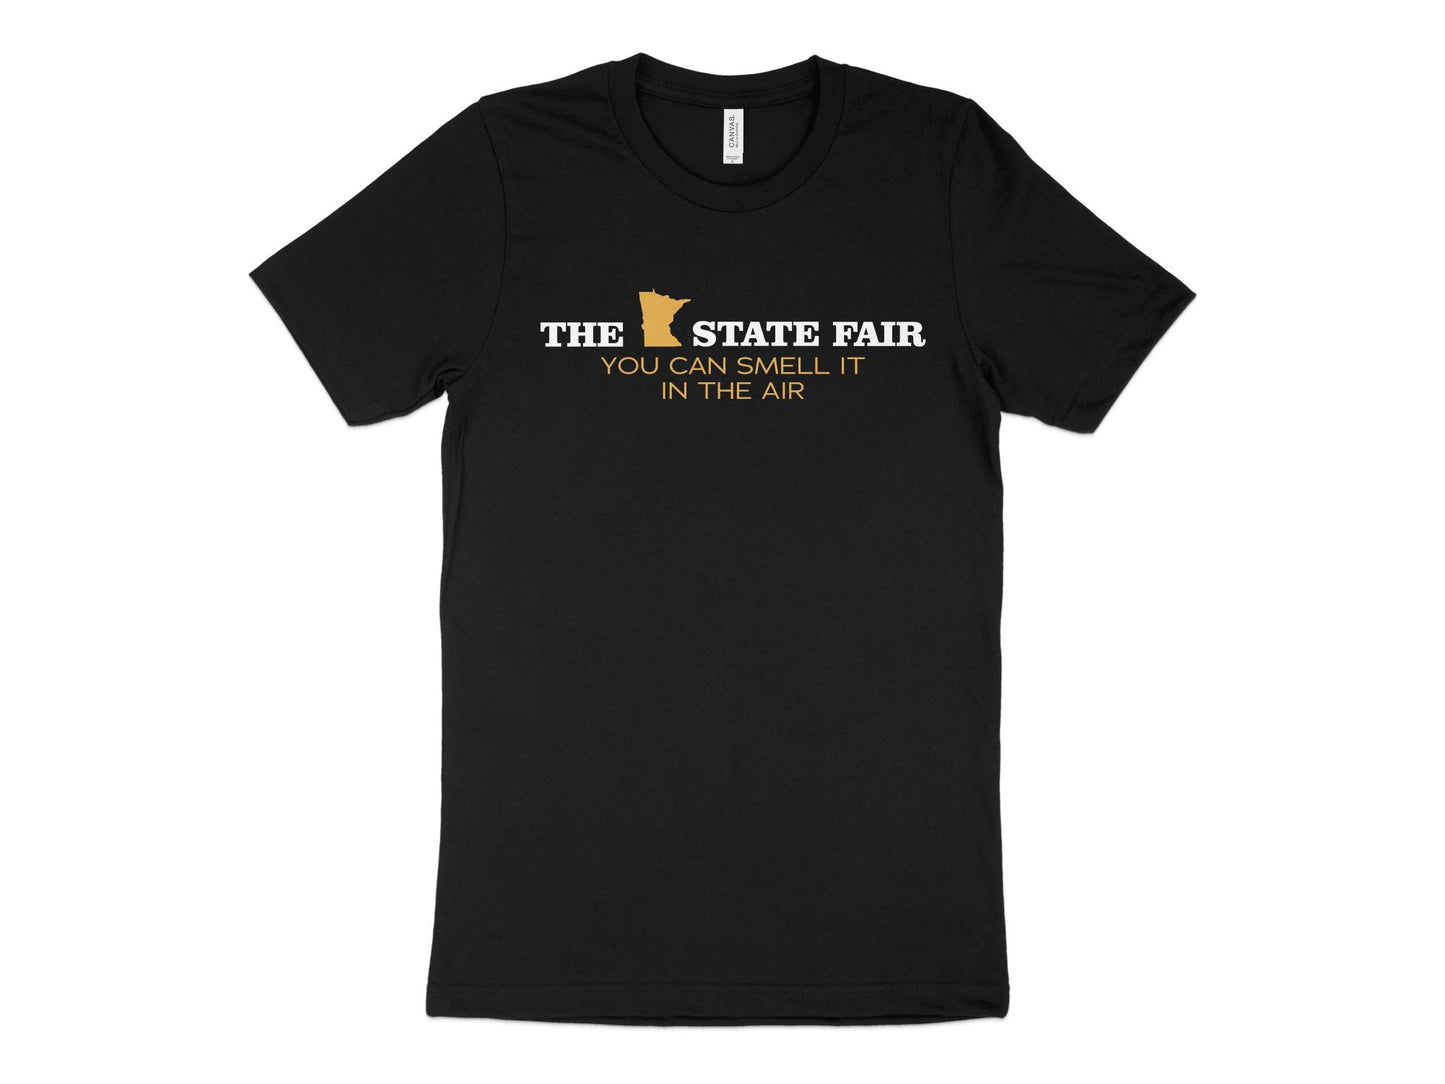 Minnesota State Fair Shirt - You Can Smell It in the Air, black